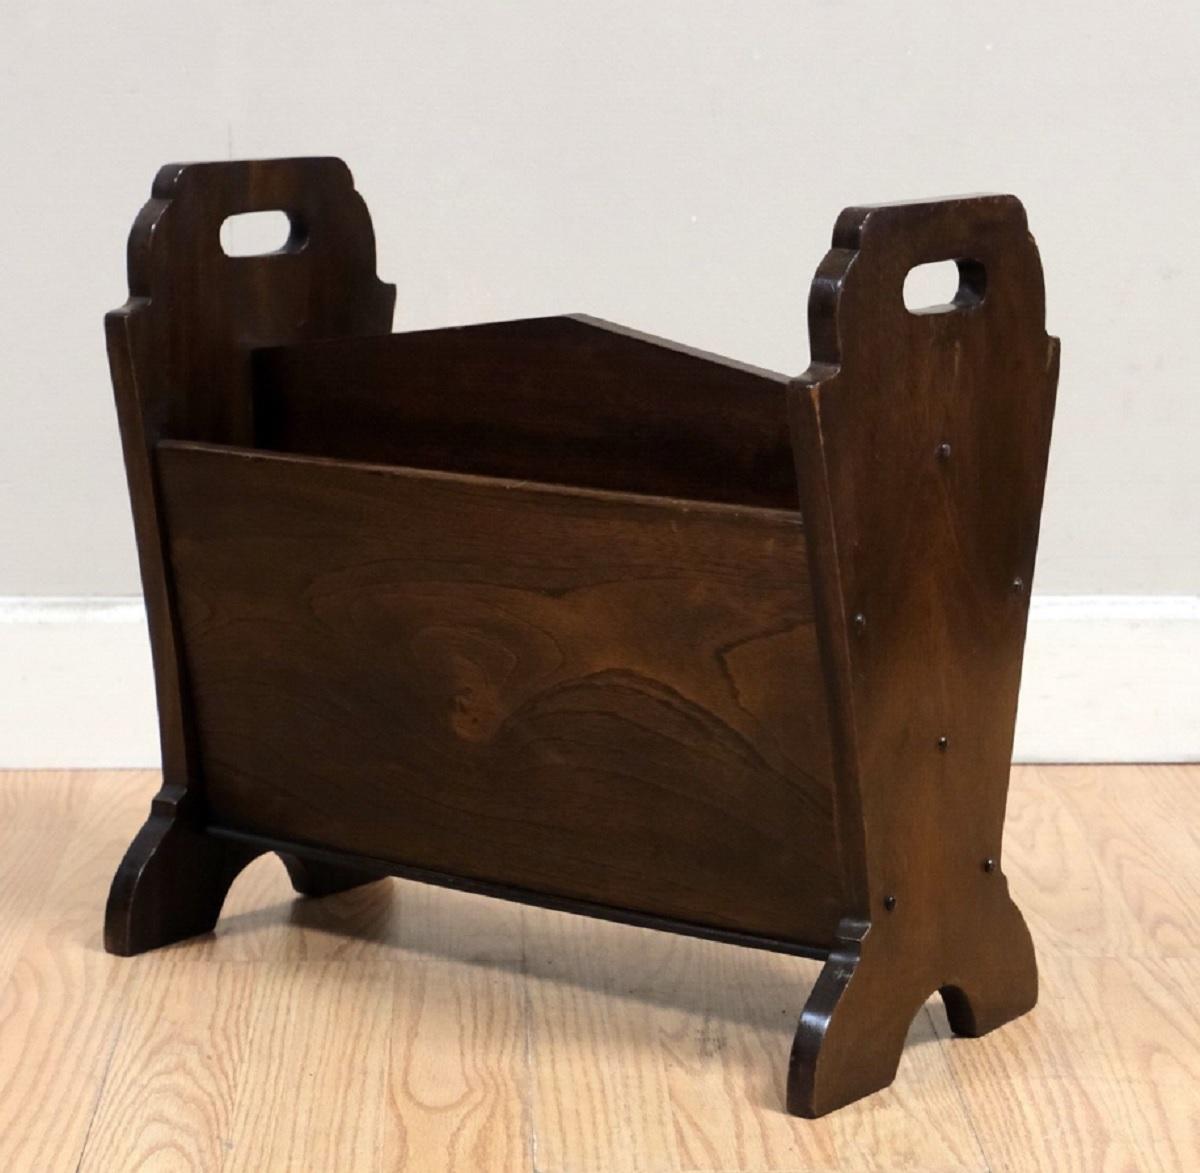 We are delighted to offer for sale this charming brown oak magazine rack with double compartment. 

This decorative, simple, stylish and well made piece is ideal to keep your magazines or newspapers all in one place. Since this item doesn't use much